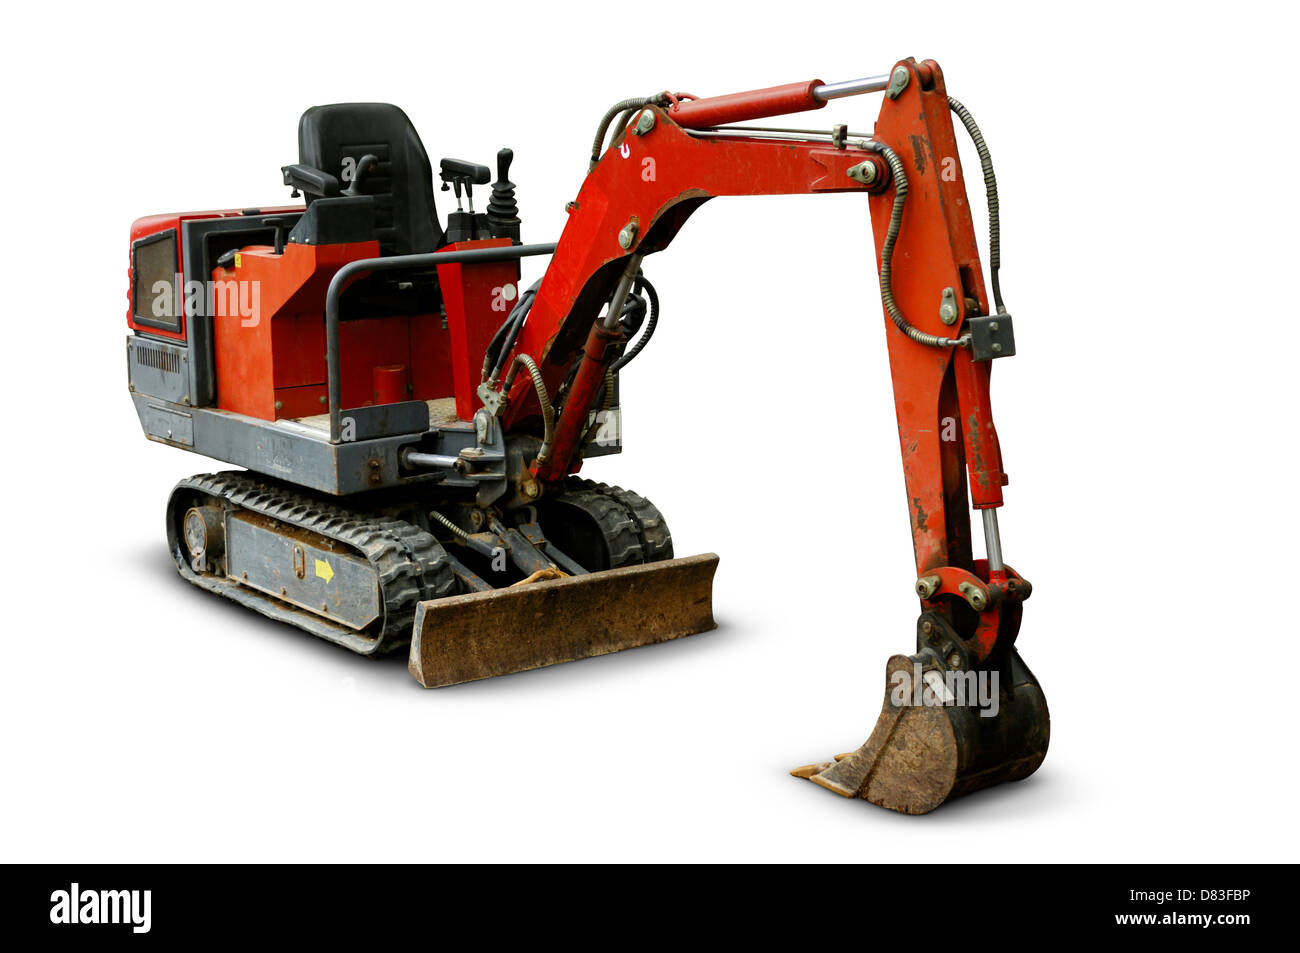 Stock photo of a Red mini excavator in park Isolated silhouette over white background with a clipping path Stock Photo